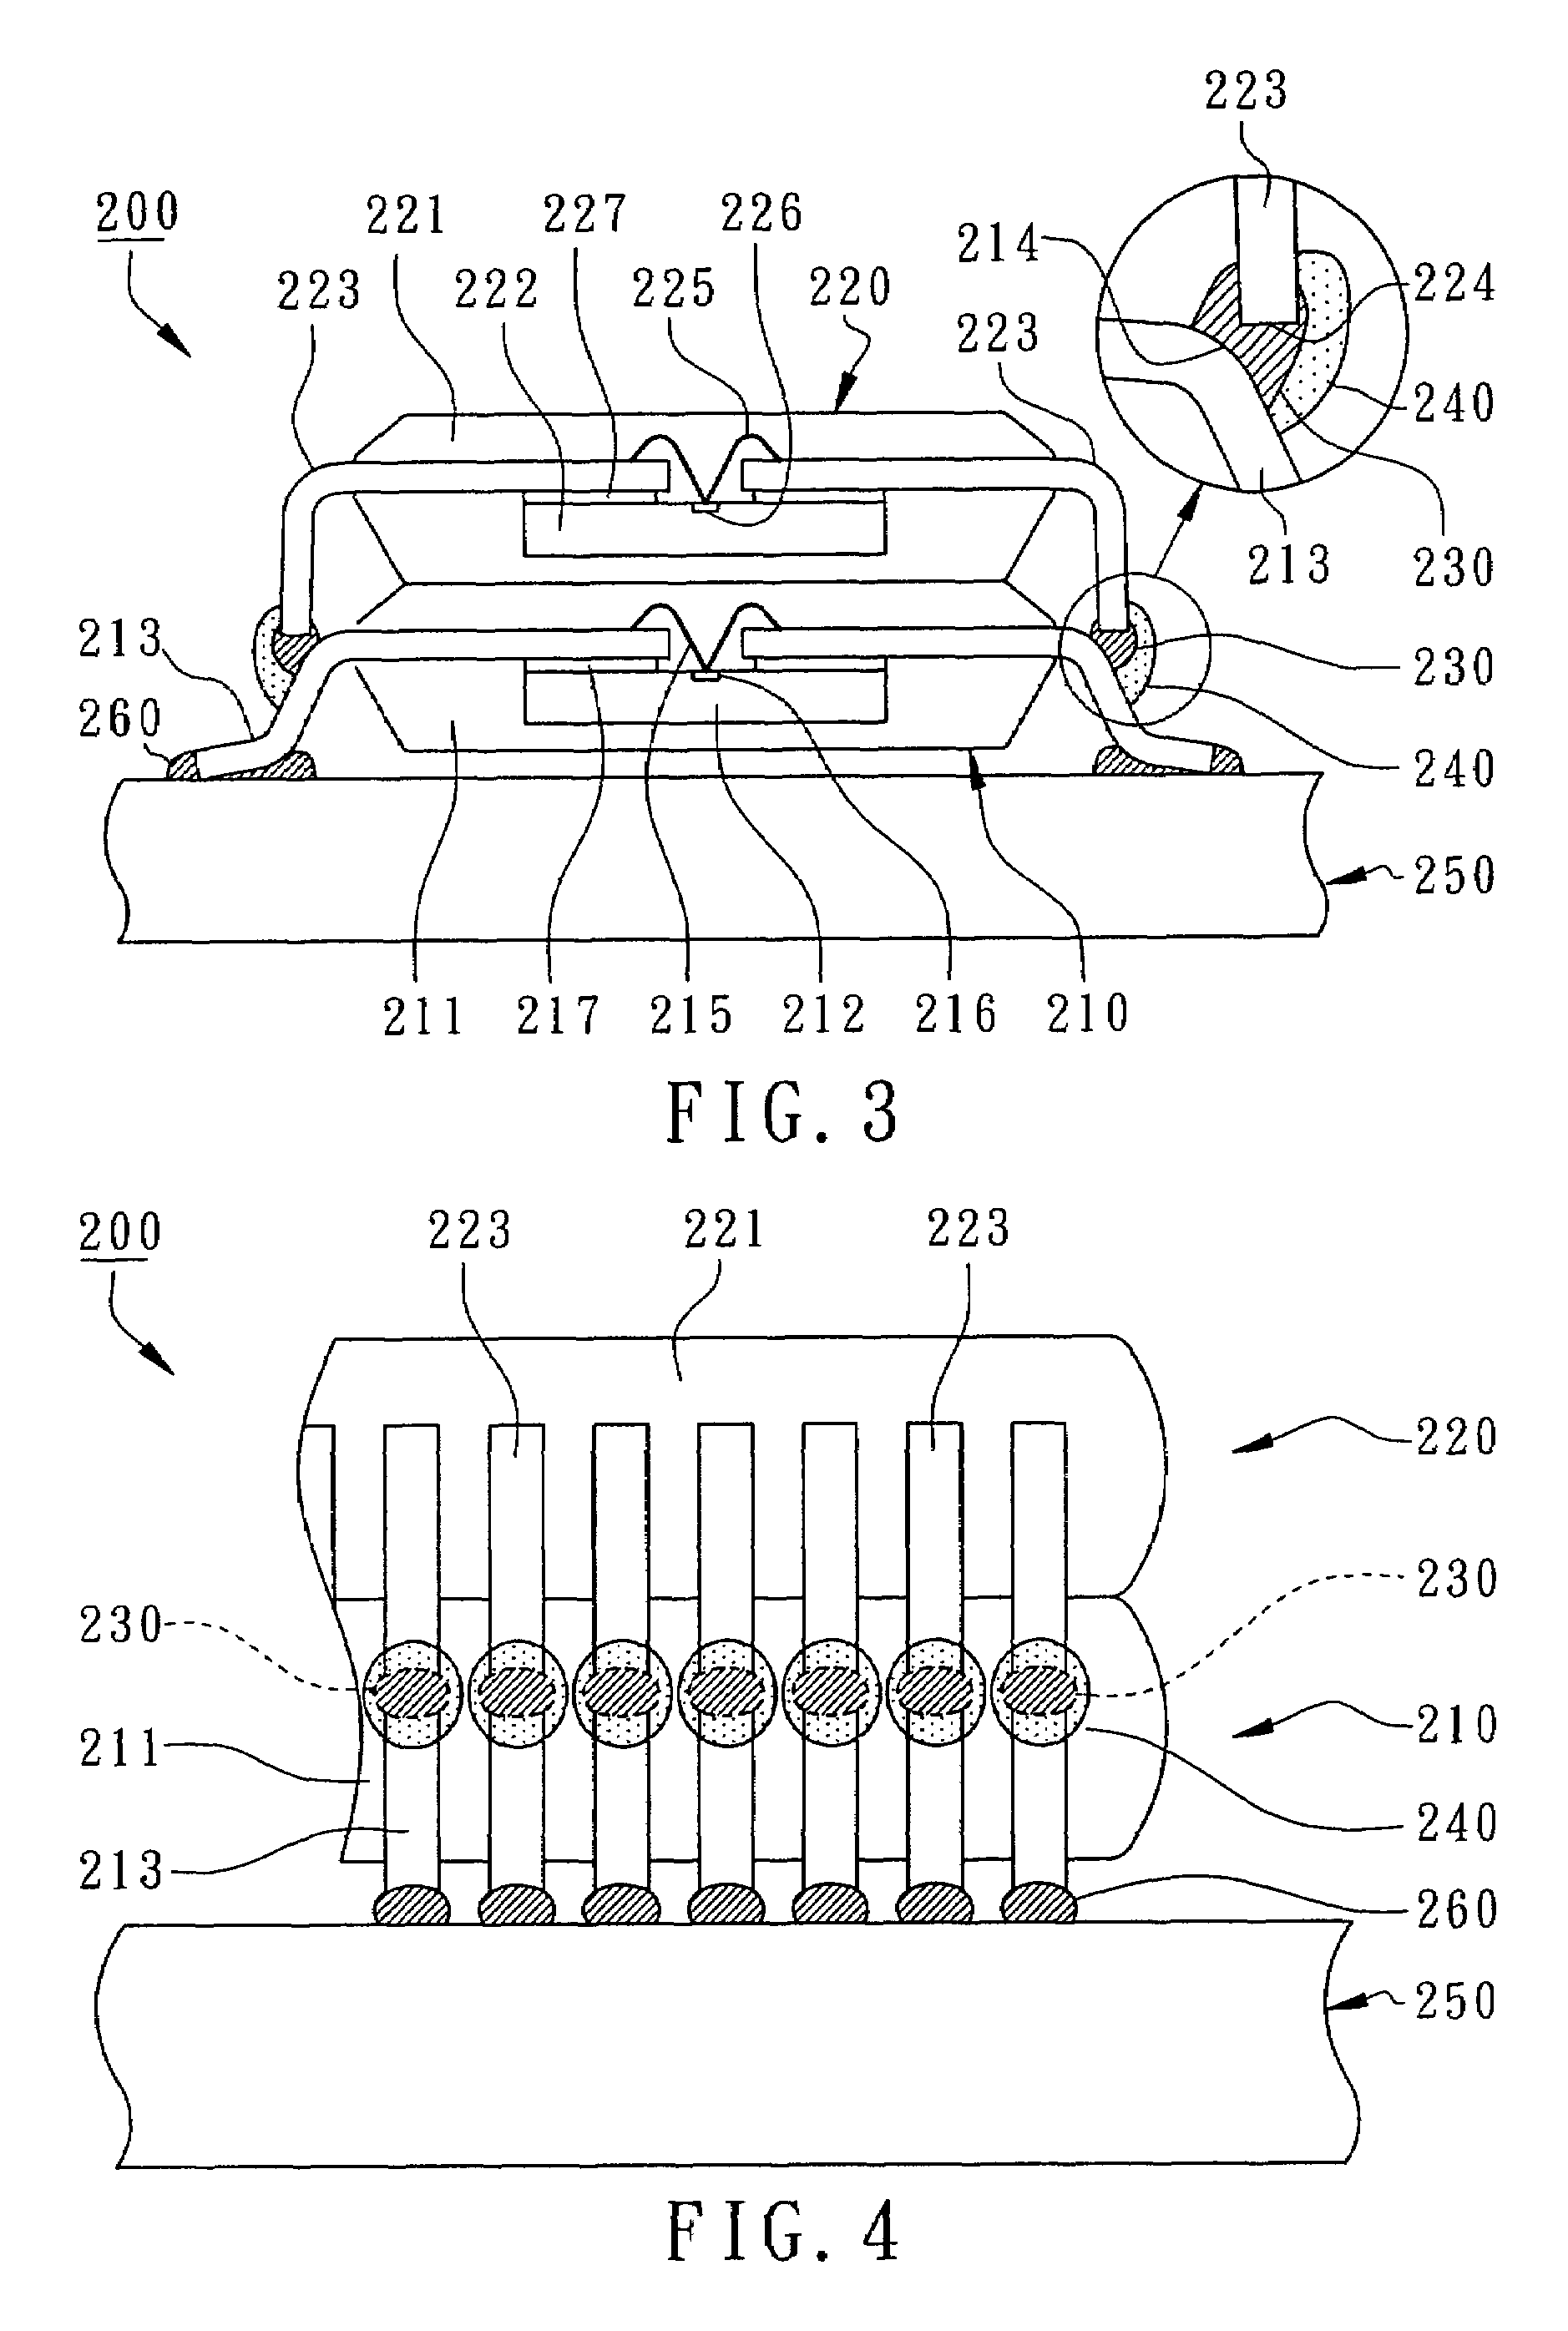 POP (package-on-package) device encapsulating soldered joints between external leads